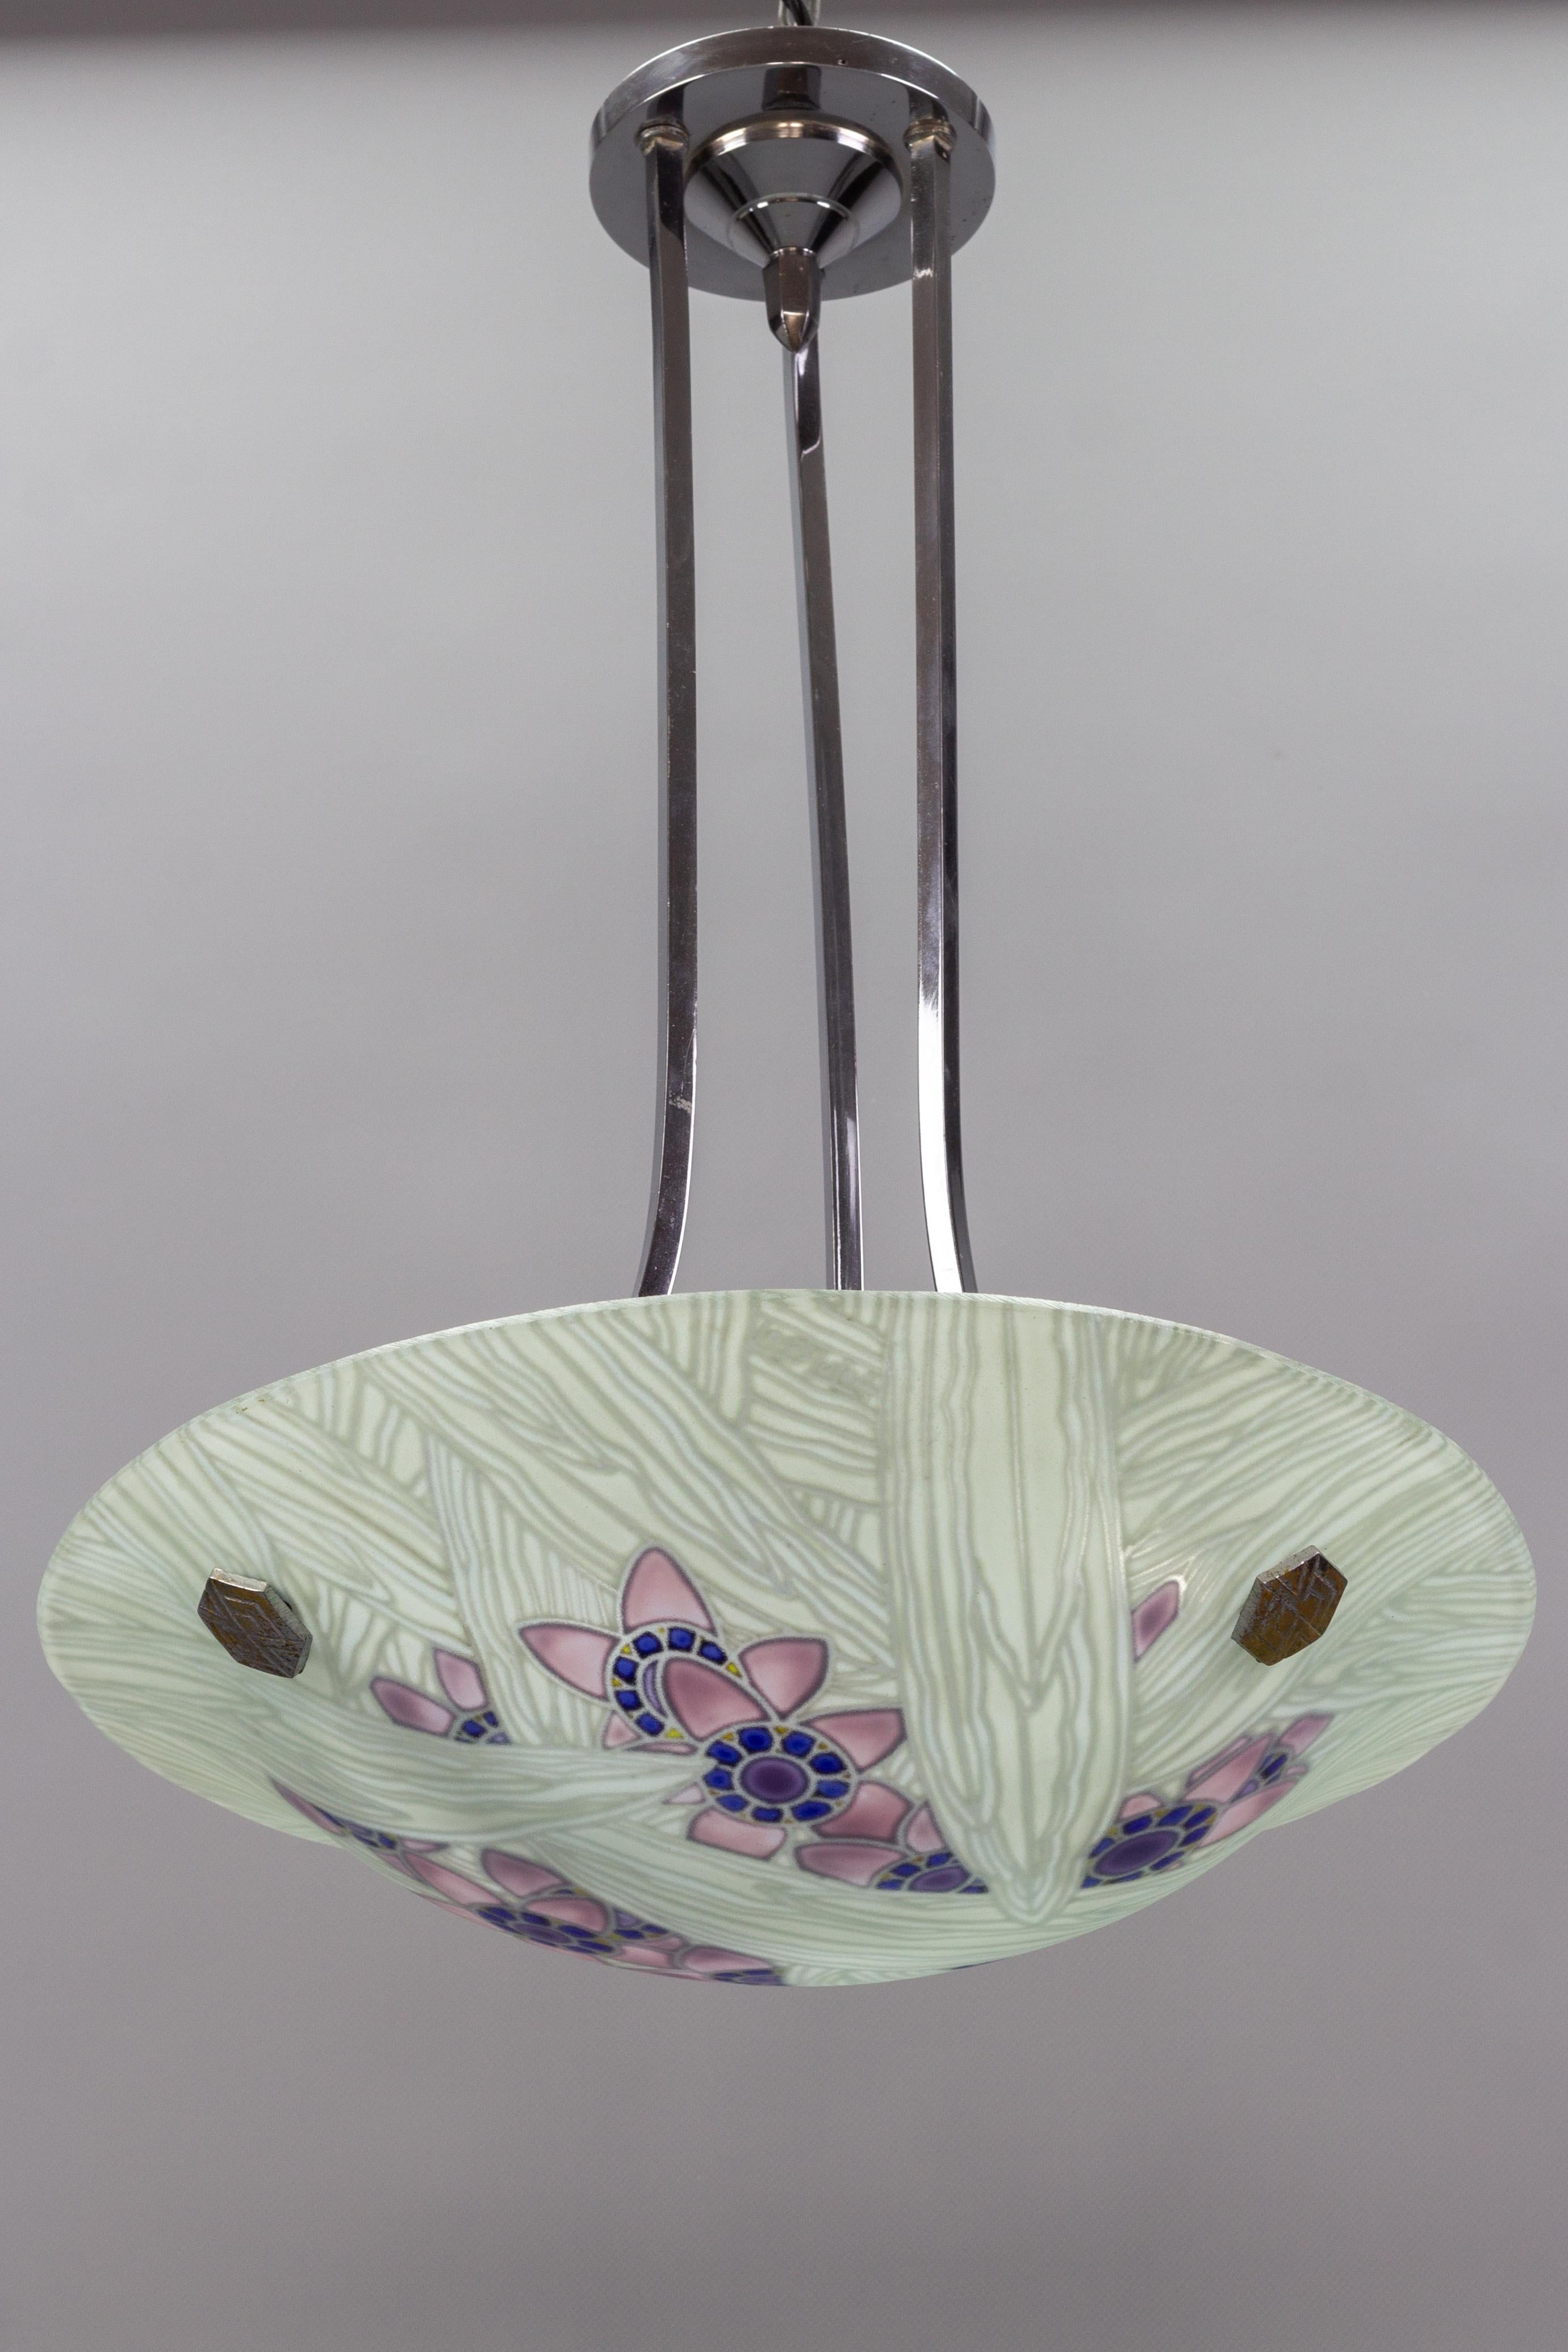 This beautiful Art Deco period hand-painted and frosted glass bowl features adorable interior floral and large leaf designs in soft pastels: purple, violet, blue and white. The glass shade is signed “Loys Lucha” by Les Verreries d'Art de Loys Lucha.